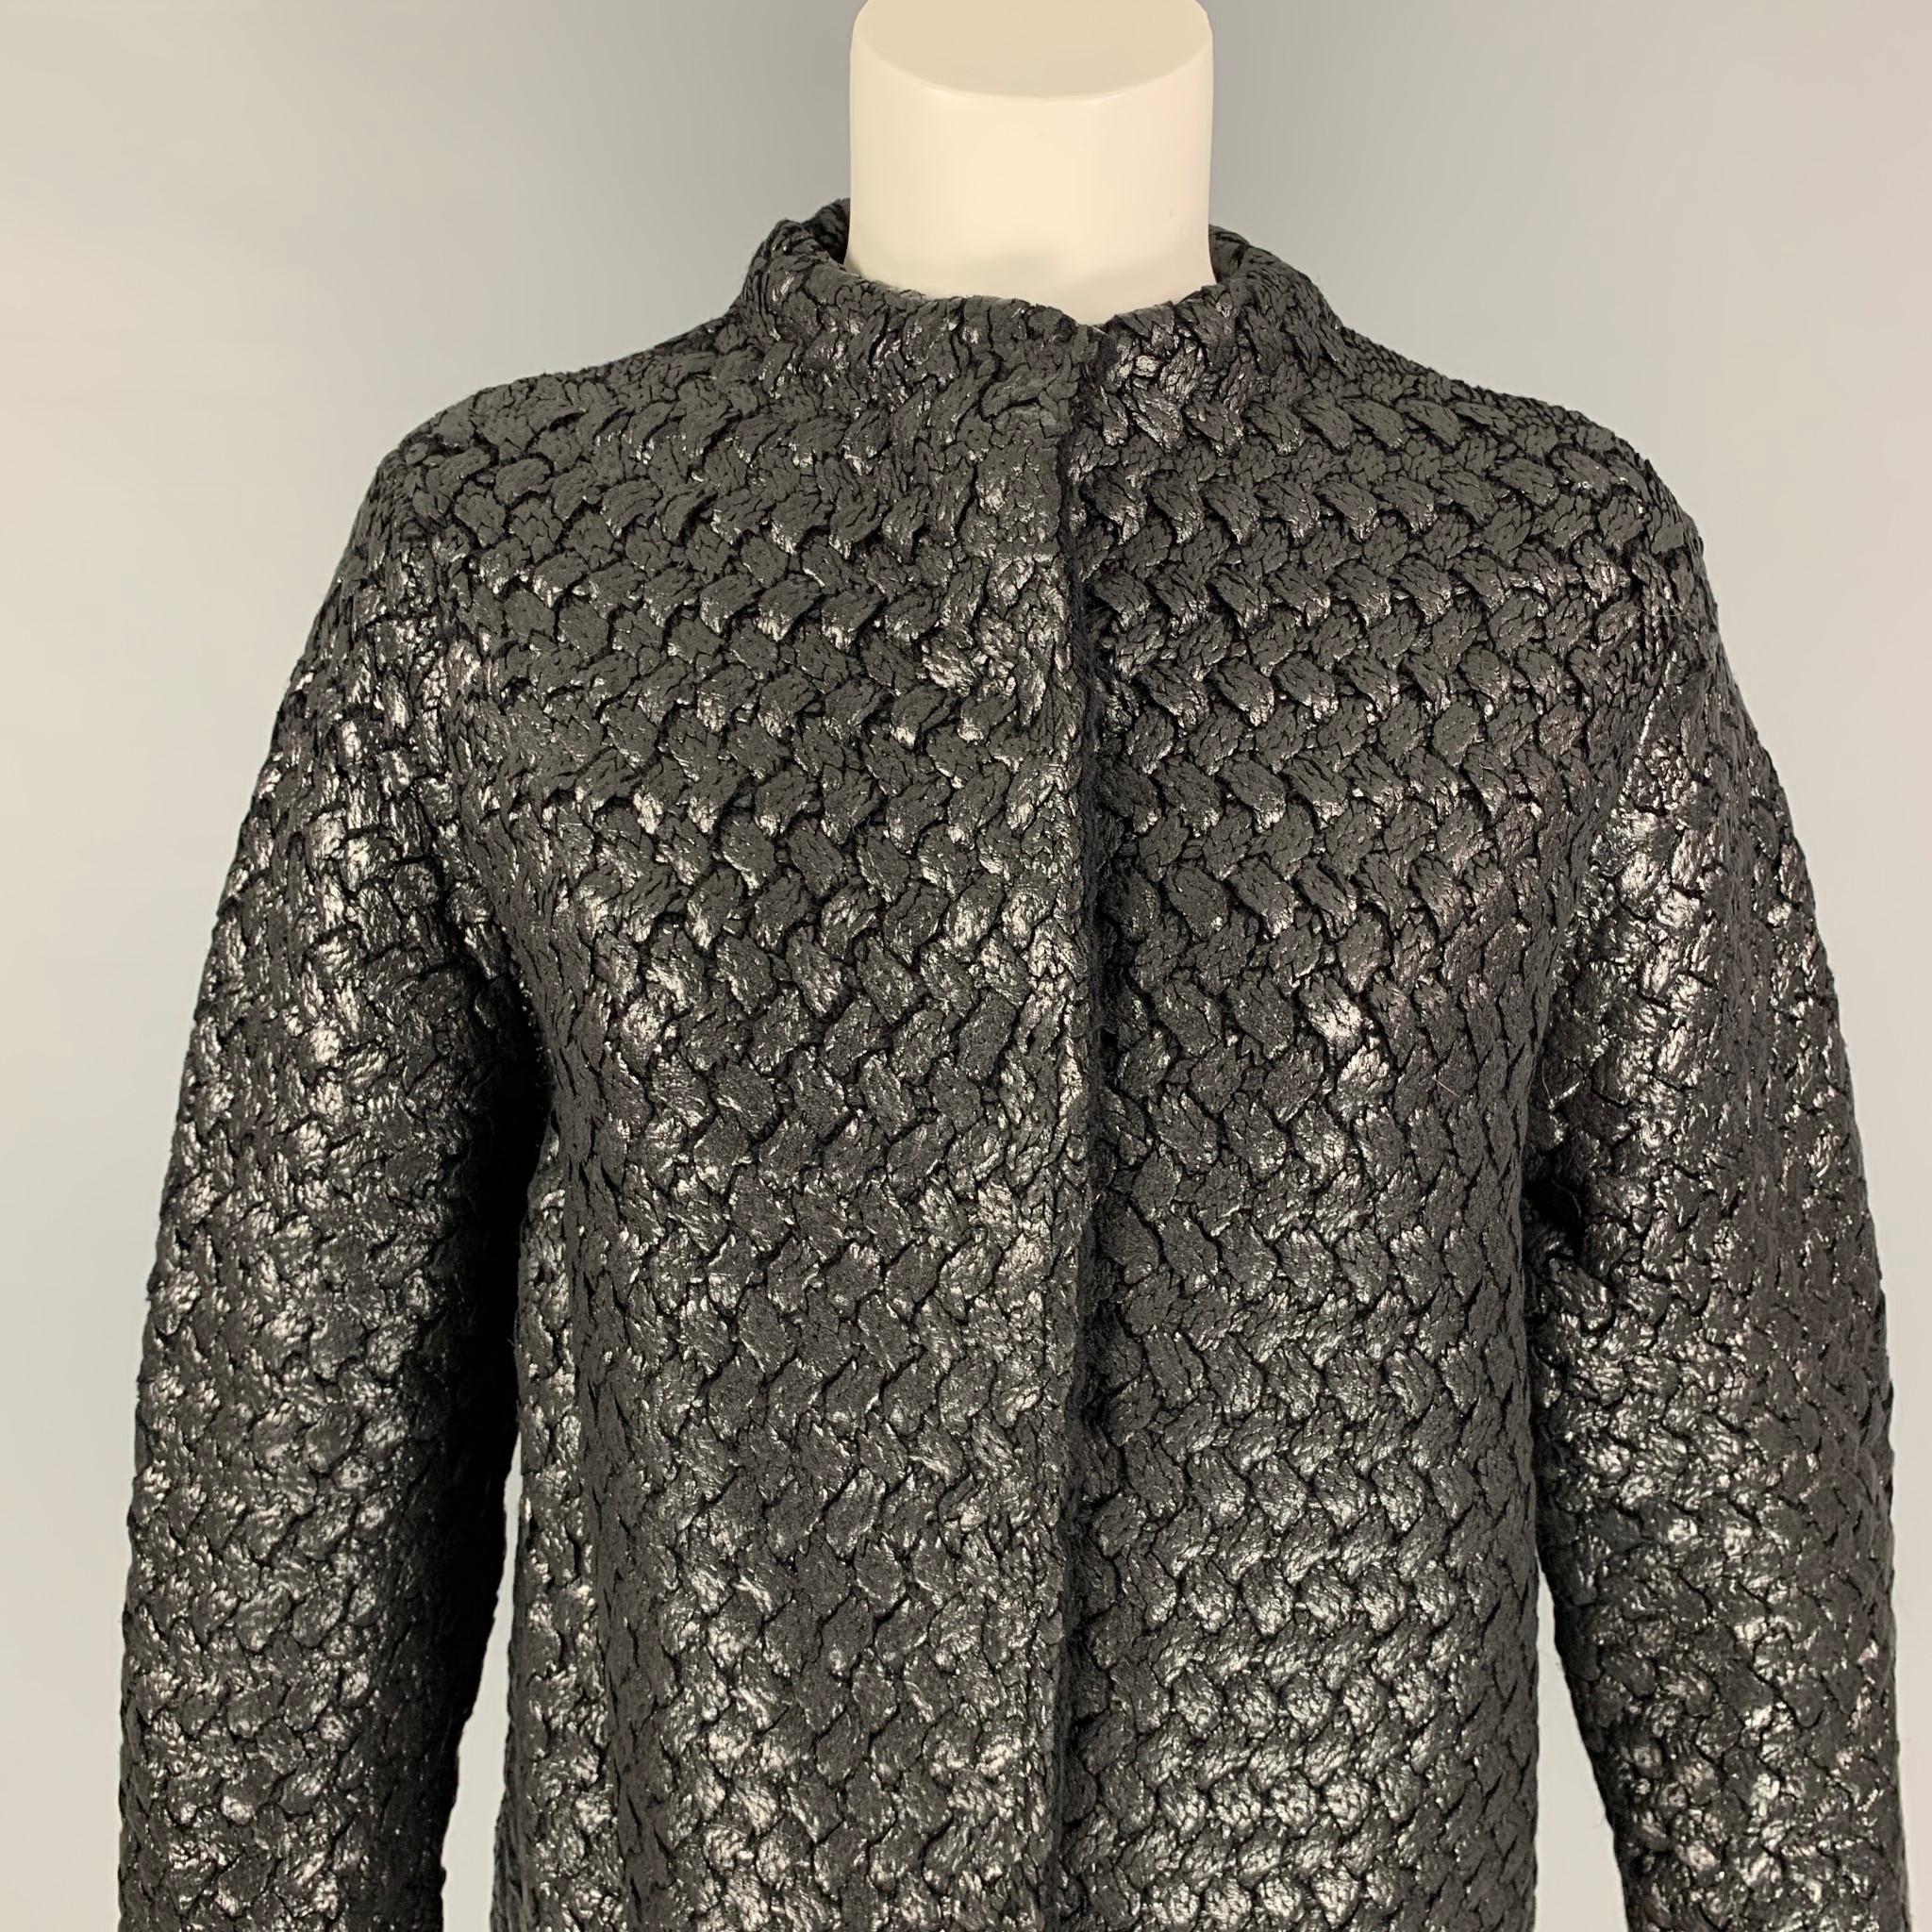 MARC JCOBS jacket comes in a silver & black jacquard floral polyester featuring a collarless style, slit pockets, and a hidden placket closure. Made in Italy.

Very Good Pre-Owned Condition.
Marked: L

Measurements:

Shoulder: 15.5 in.
Bust: 36